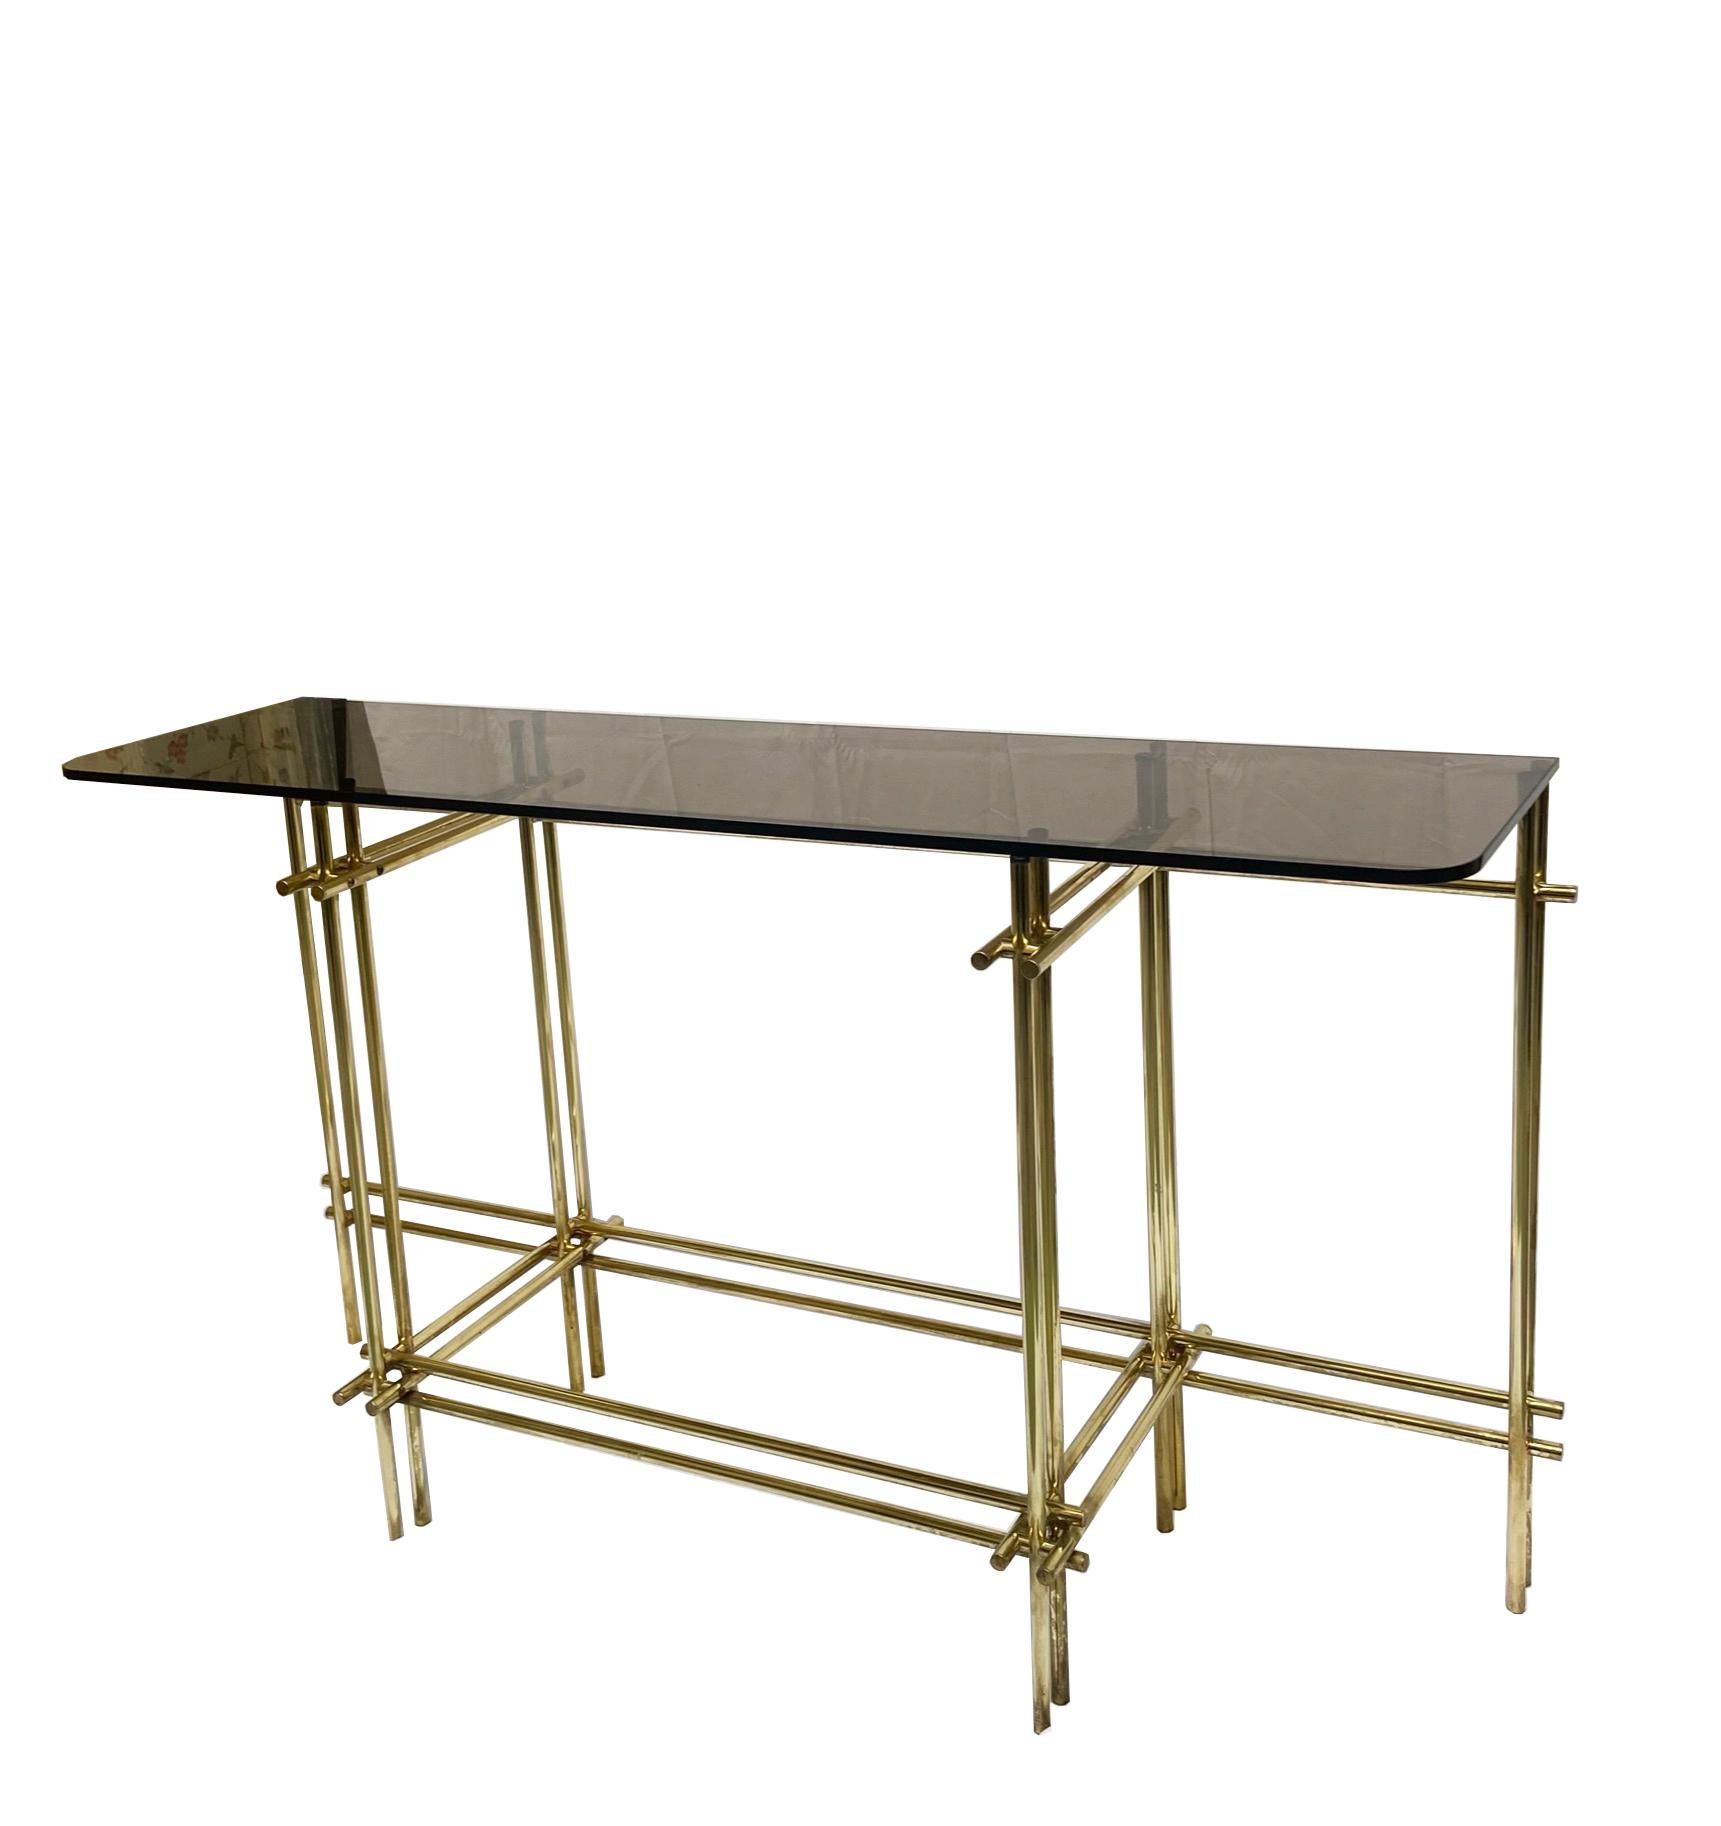 Magnificent console in brass and smoked glass designed in the 1970s by Renato Zevi.